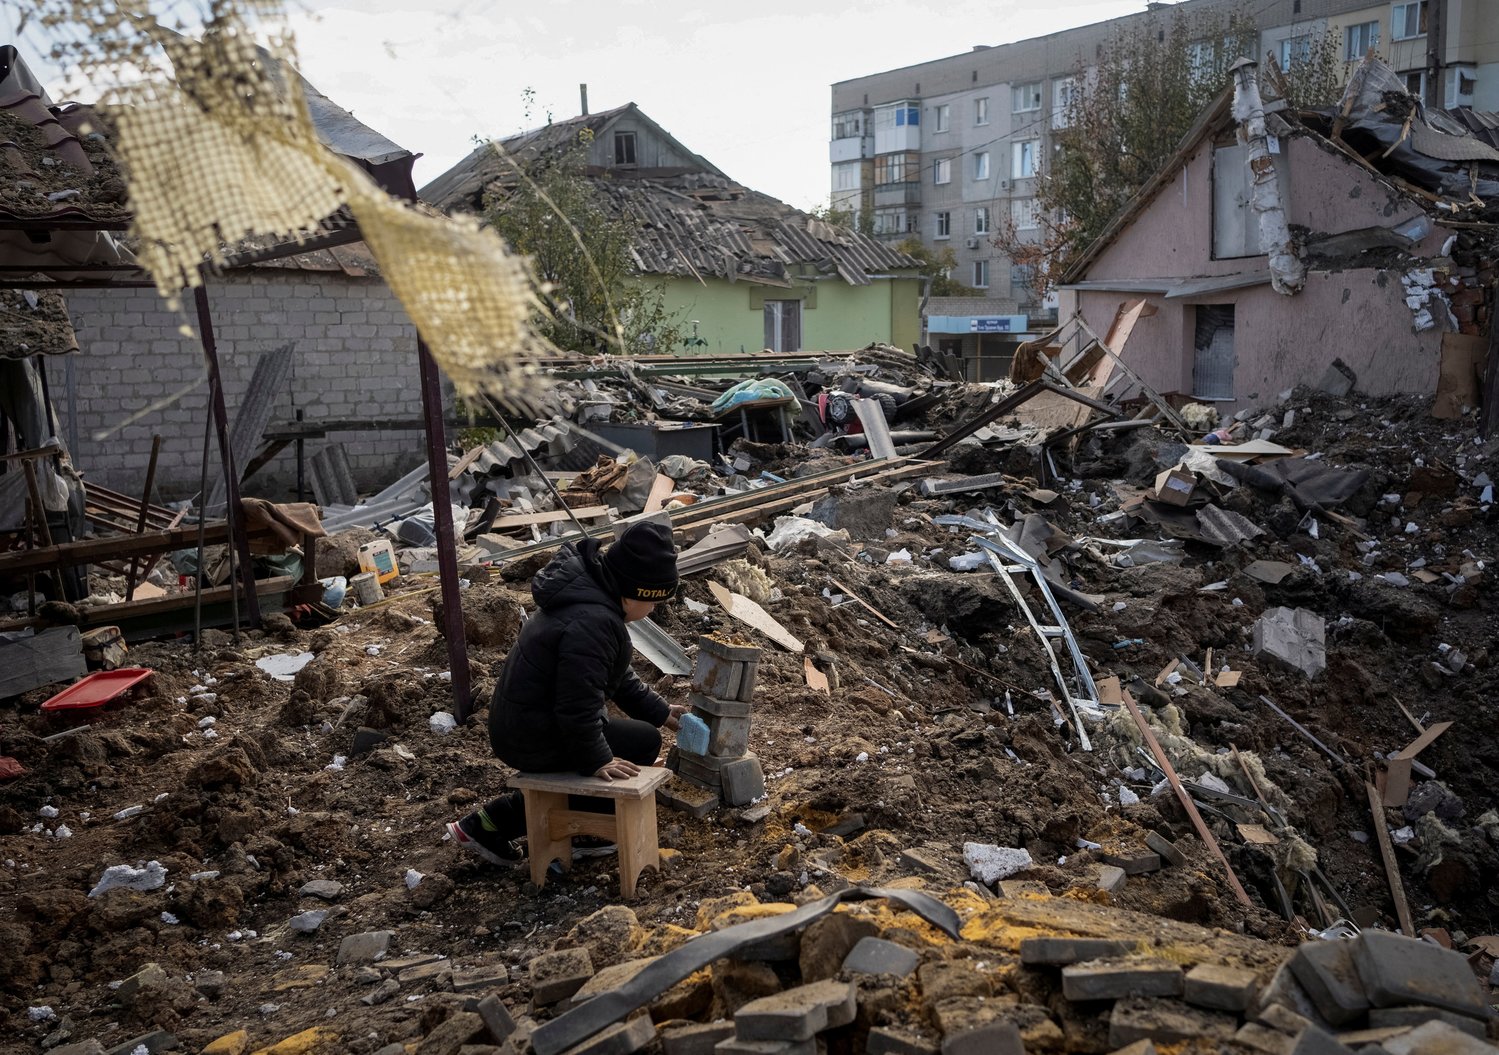 A boy plays on the ruins of his grandmother's house in Kupiansk, Ukraine, Oct. 16, 2022, amid Russia's attack on Ukraine. During the month of November, Pope Francis is asking people to pray for children who are suffering because of poverty, war and exploitation.